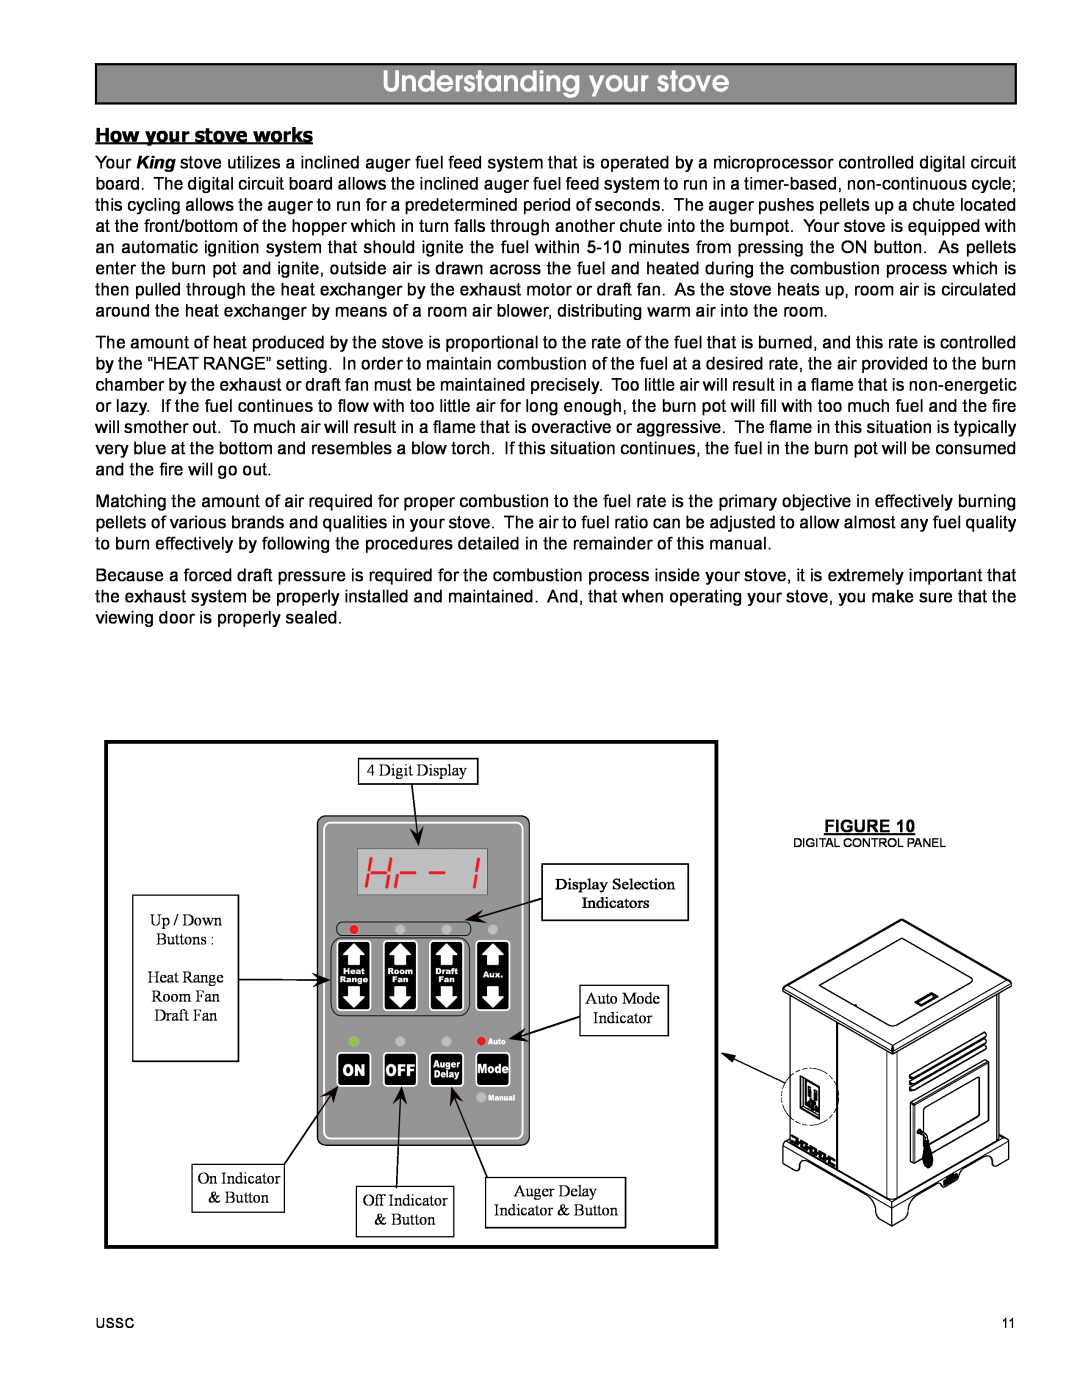 United States Stove 5510 owner manual Understanding your stove, How your stove works 